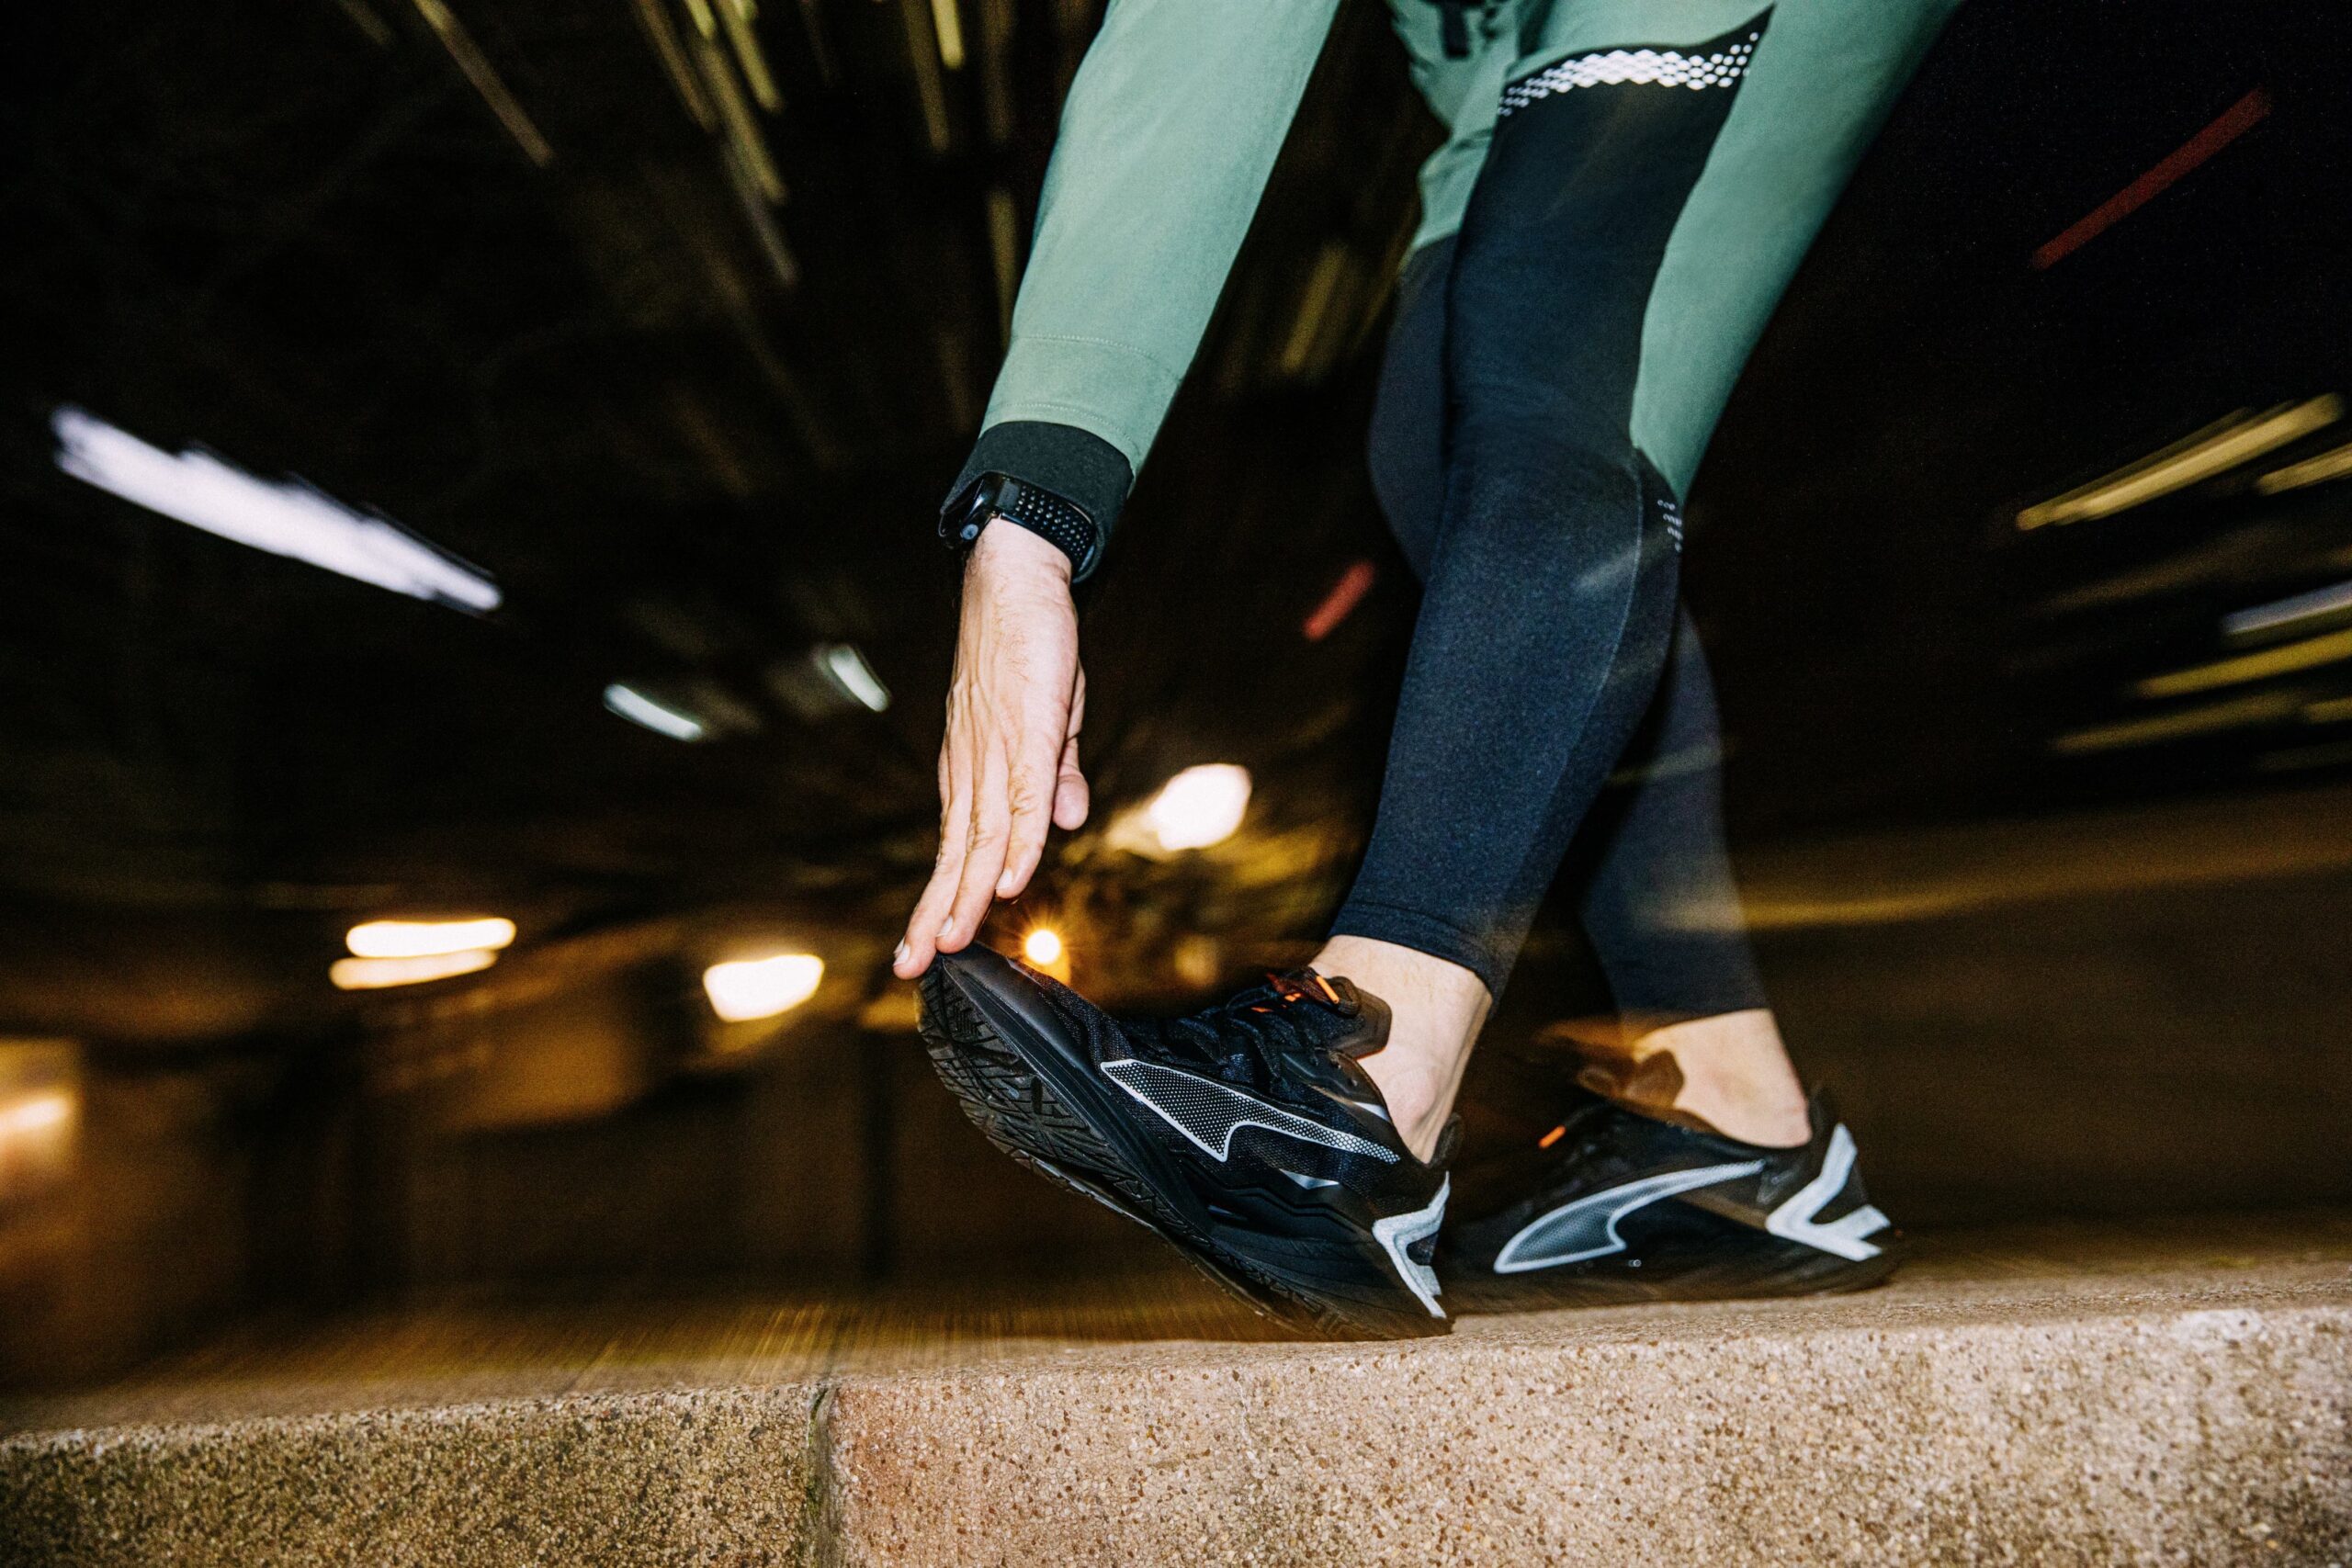 Built on the foundation of reductionist theory, ultraride removes the limits with outsole cutaways to leave you with one basic running essential: cushioning and responsiveness for limitless potential.